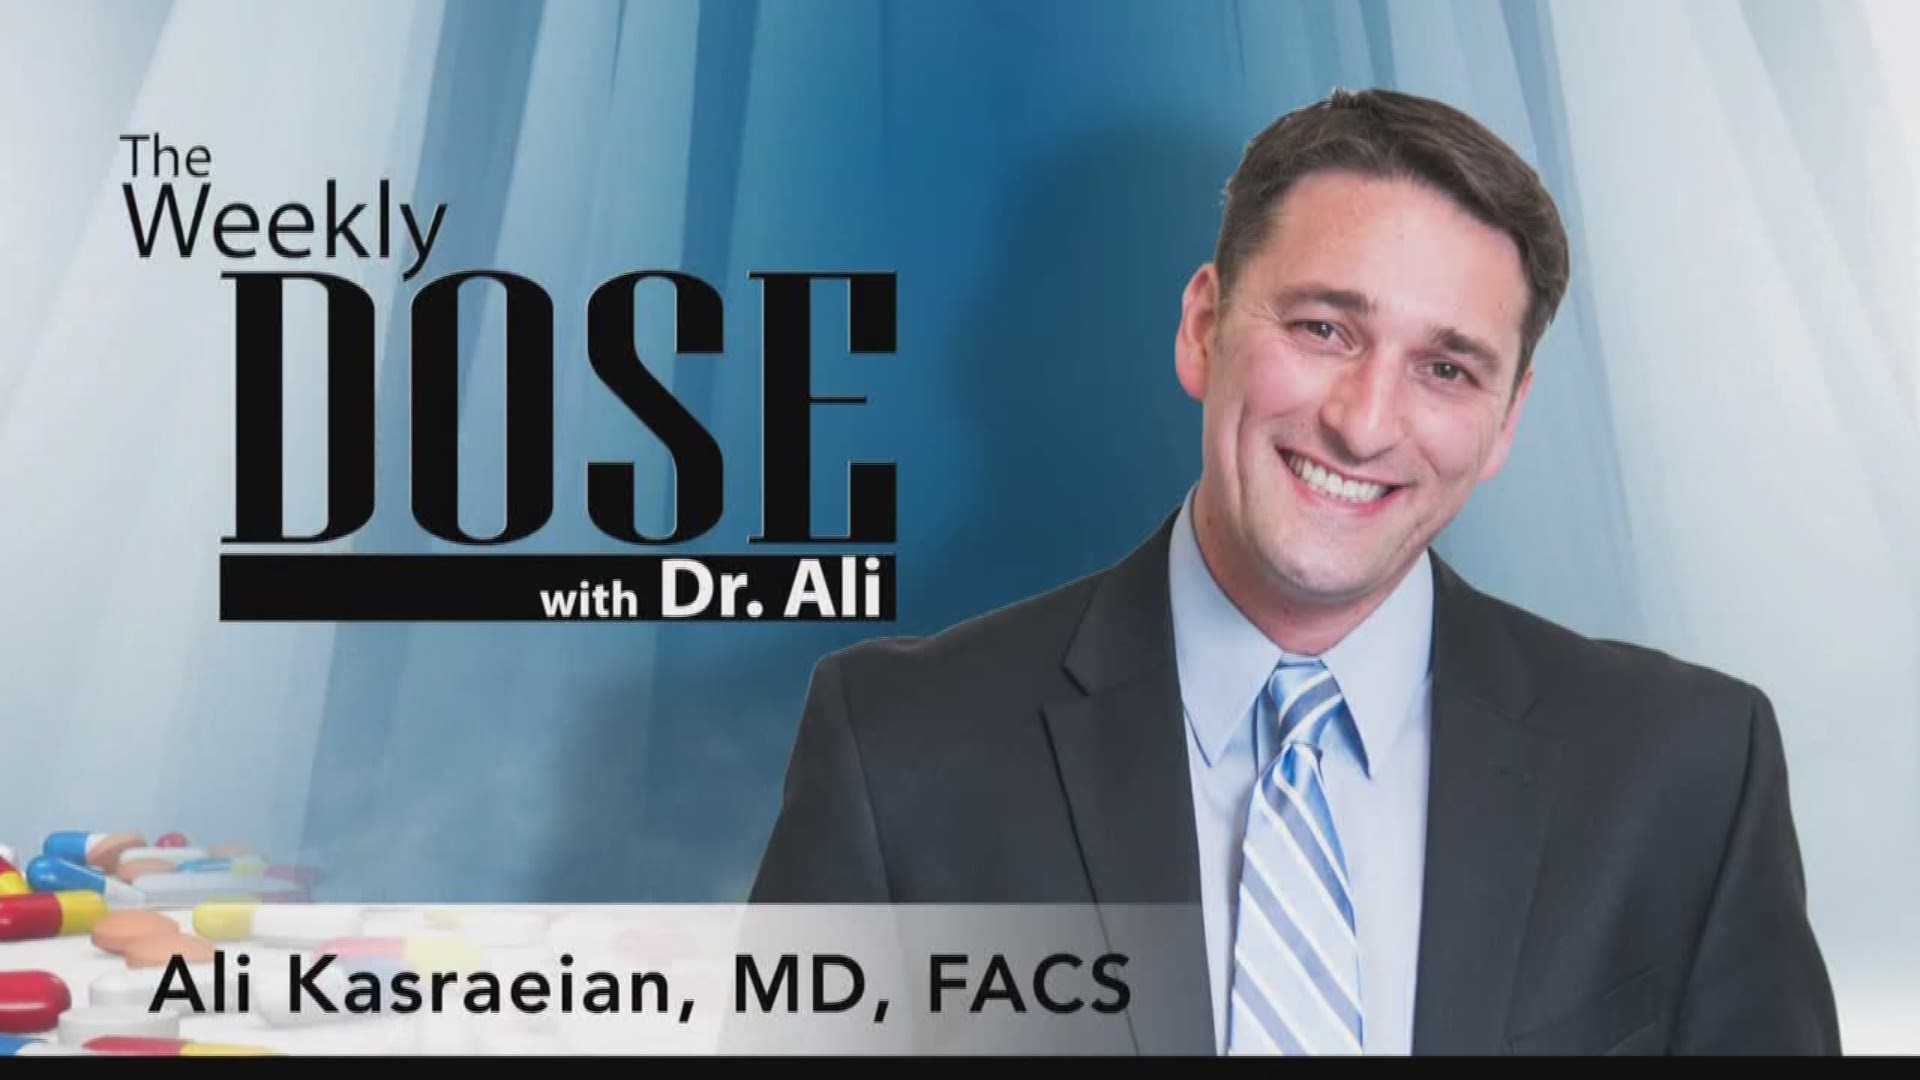 The Weekly Dose with Dr. Ali